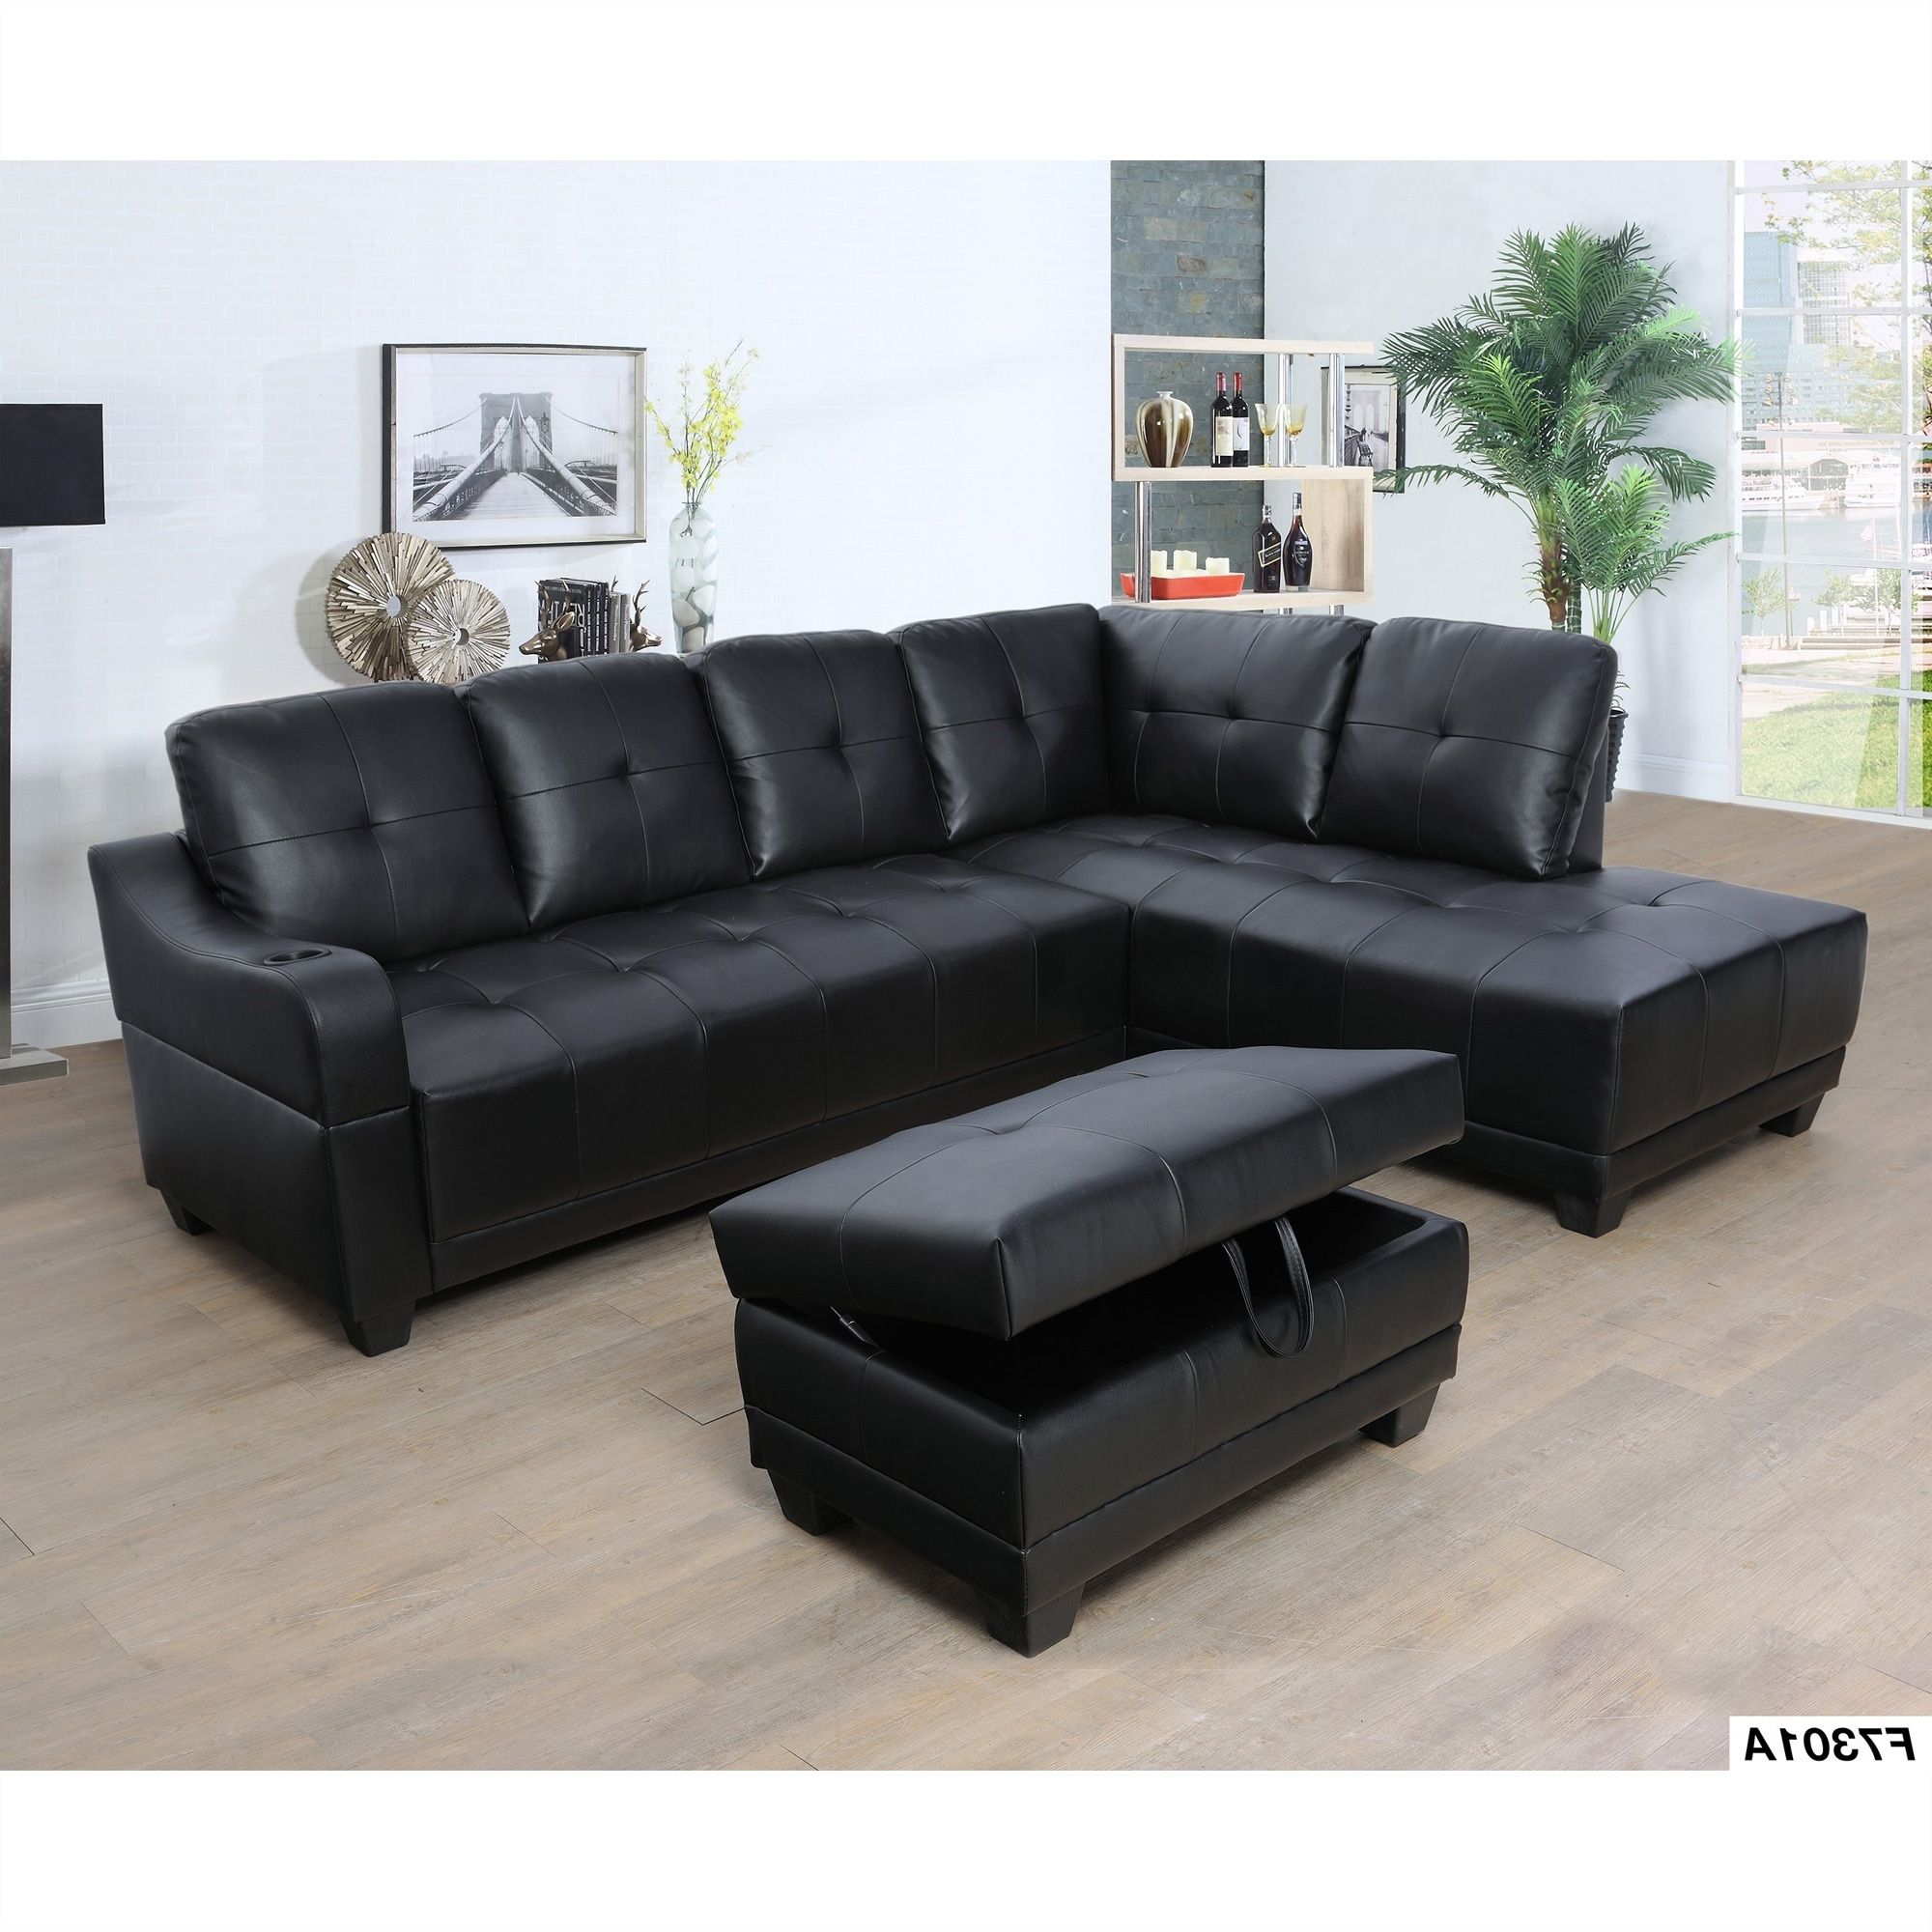 Sectional Sofa Set With Cup Holder,right Facing,black(7301b) – Bed Bath &  Beyond – 33762765 Within Right Facing Black Sofas (Photo 15 of 15)